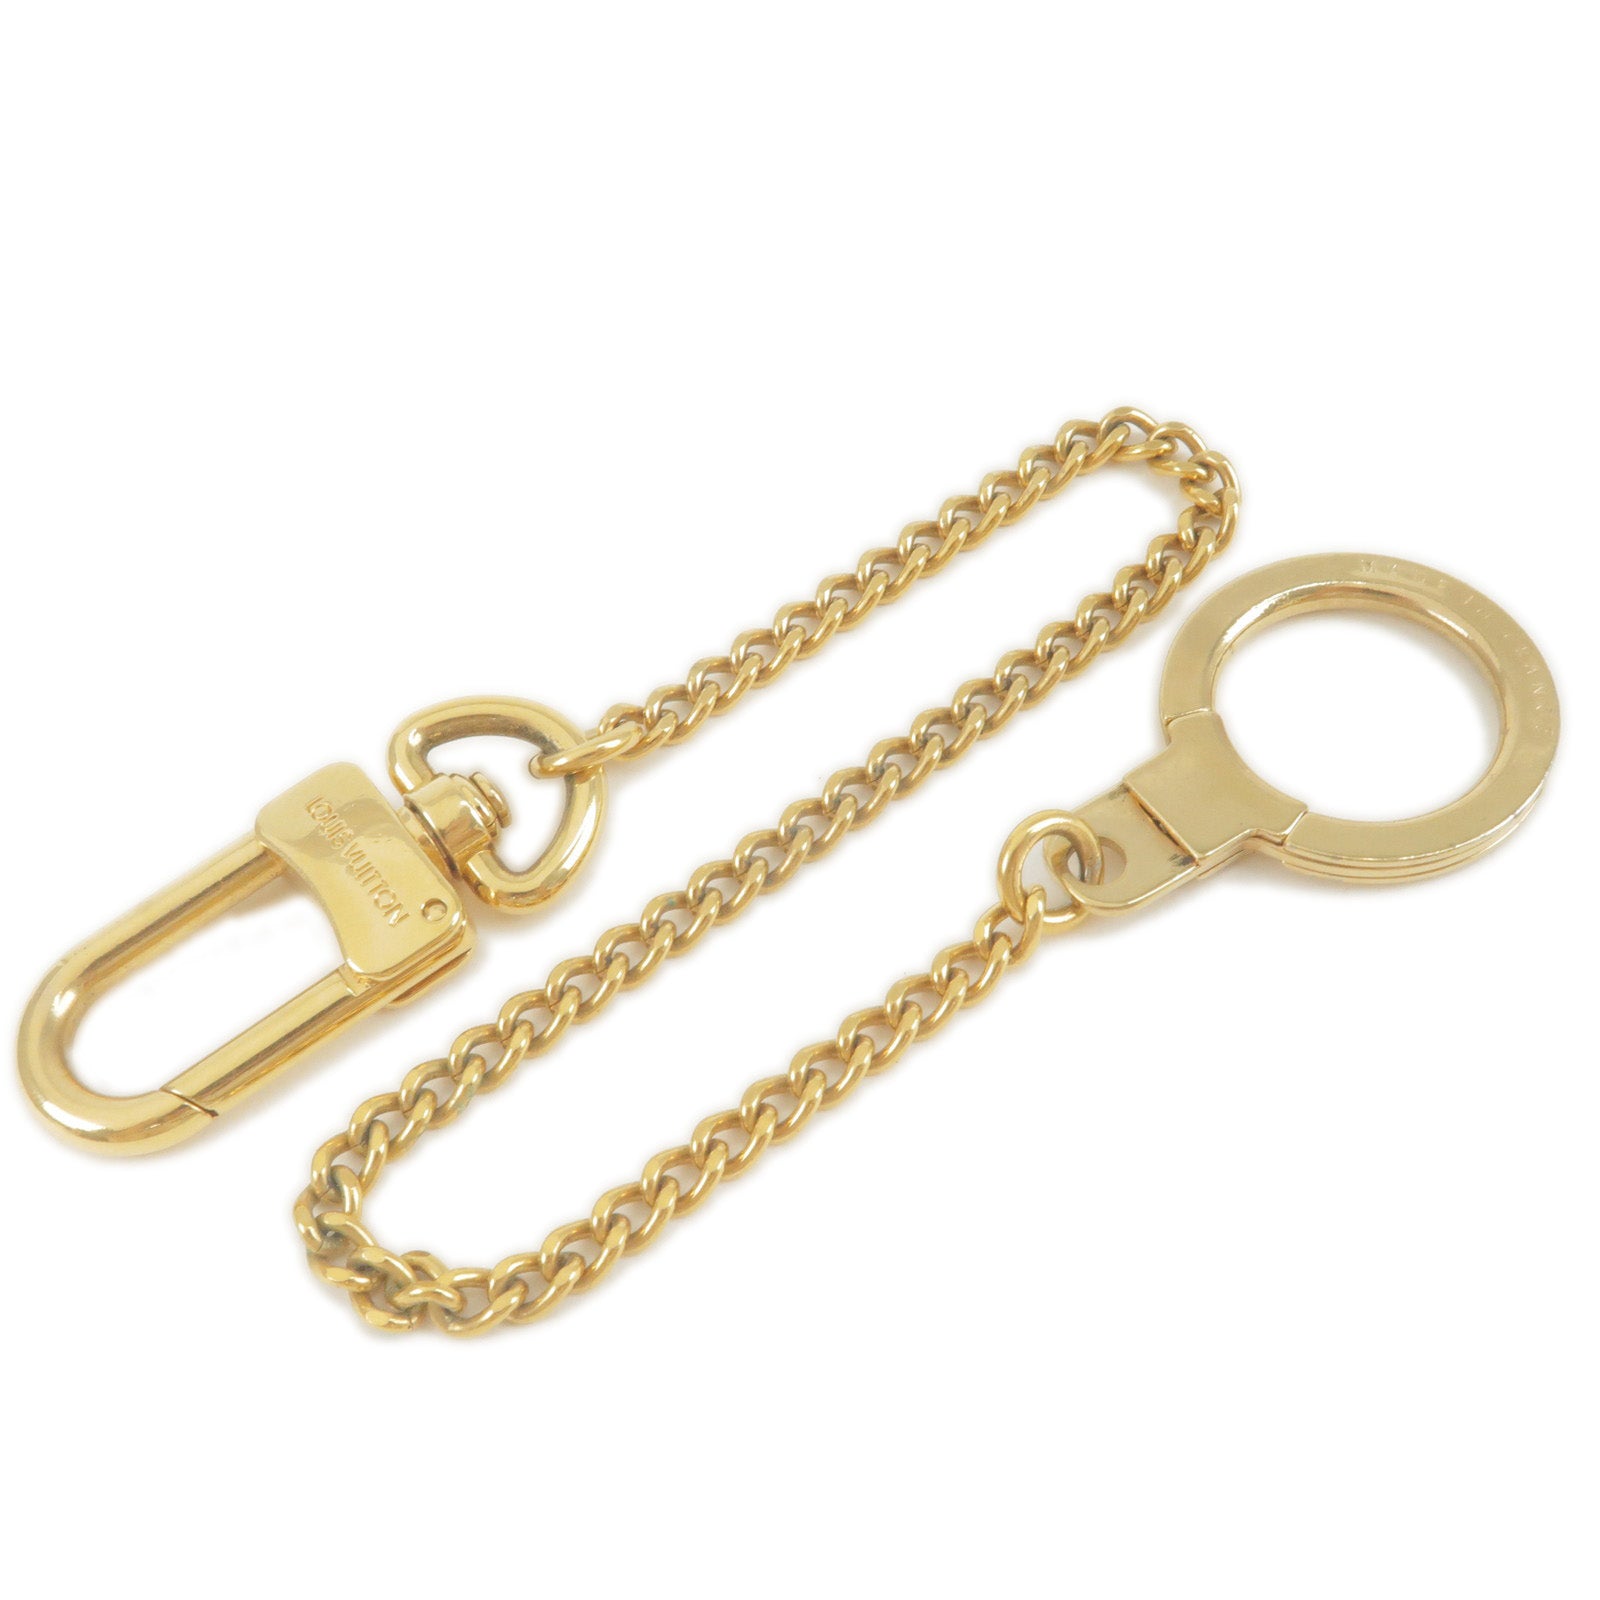 Authentic-Louis-Vuitton-Chenne-Ano-Cles-Key-Chain-Key-Charm-Gold-M58021-Used-F/S